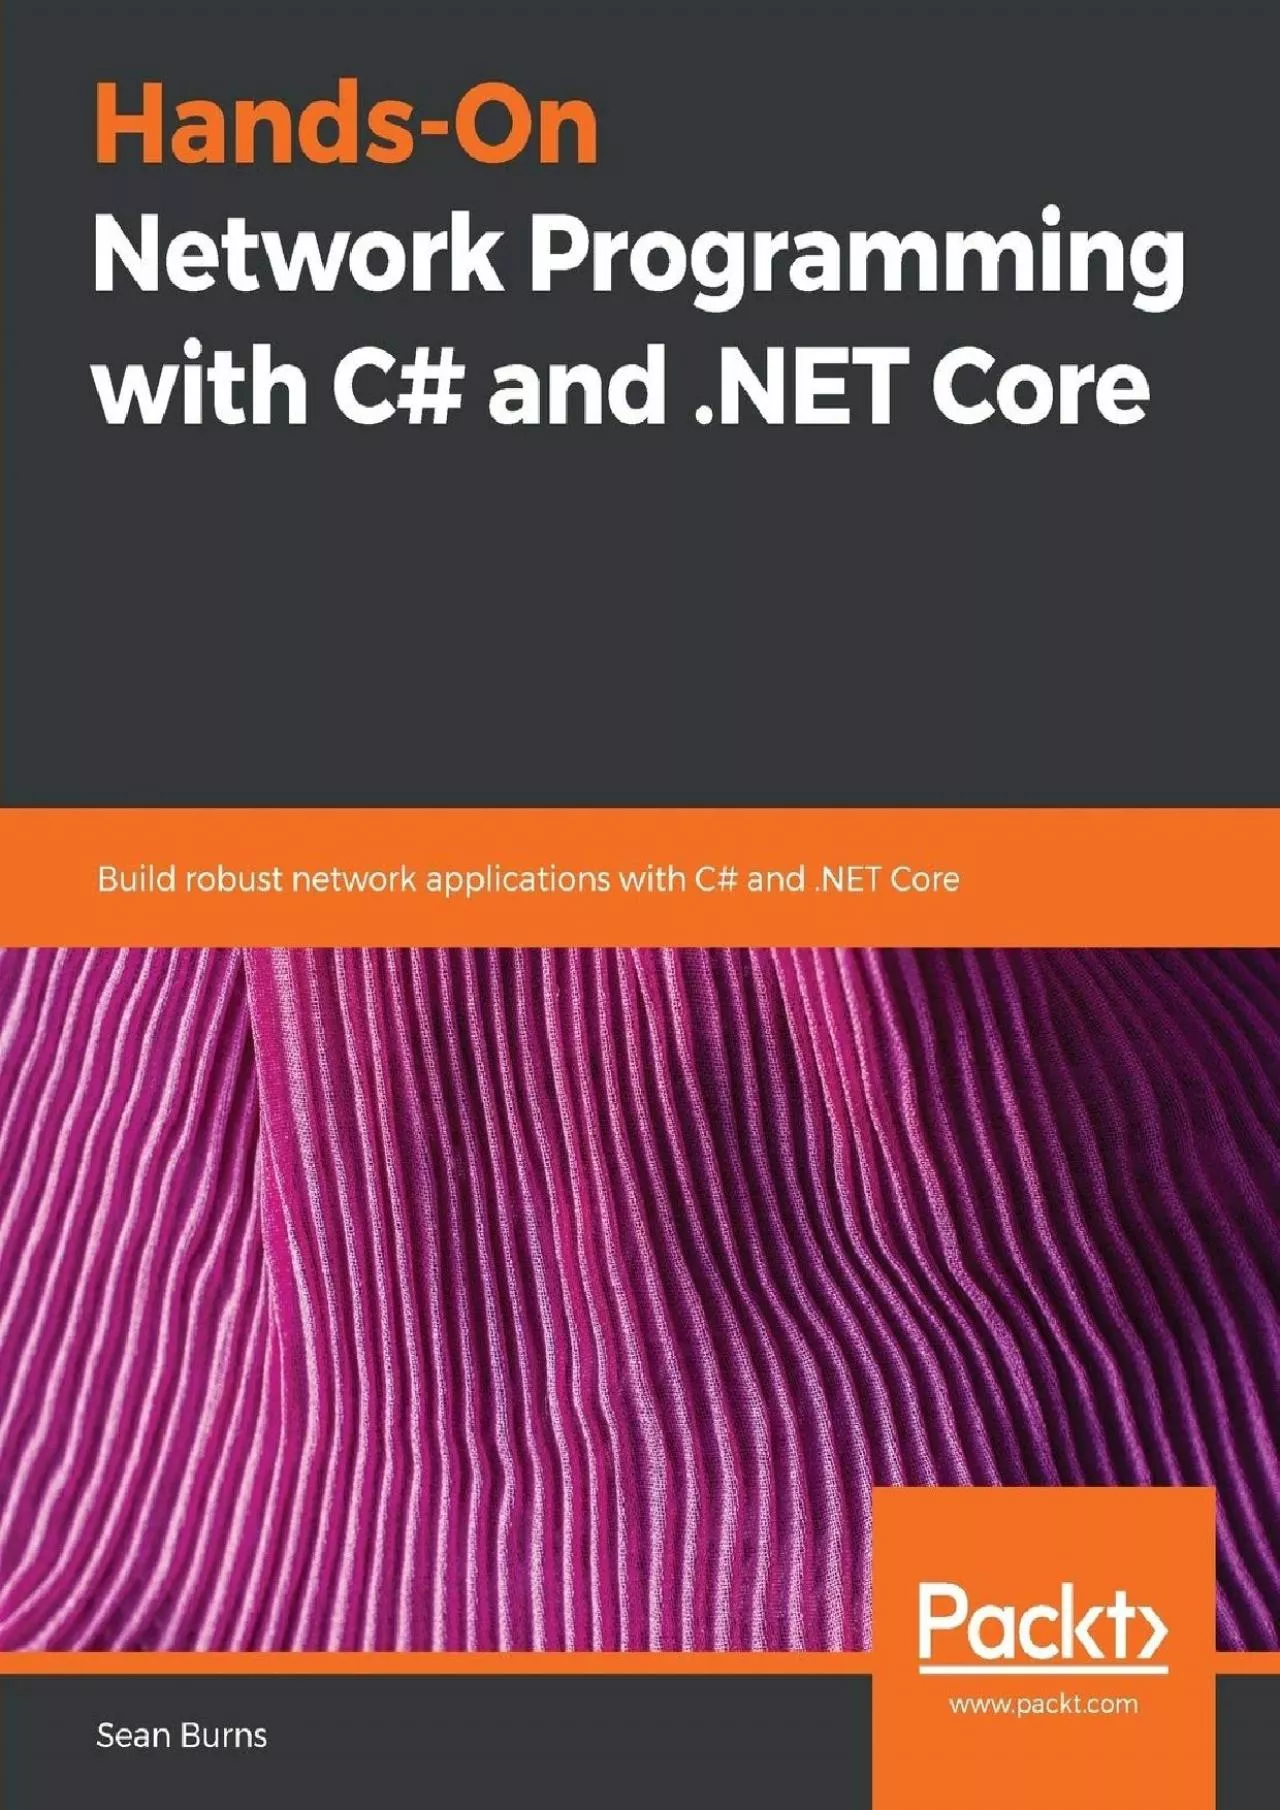 [FREE]-Hands-On Network Programming with C and .NET Core: Build robust network applications